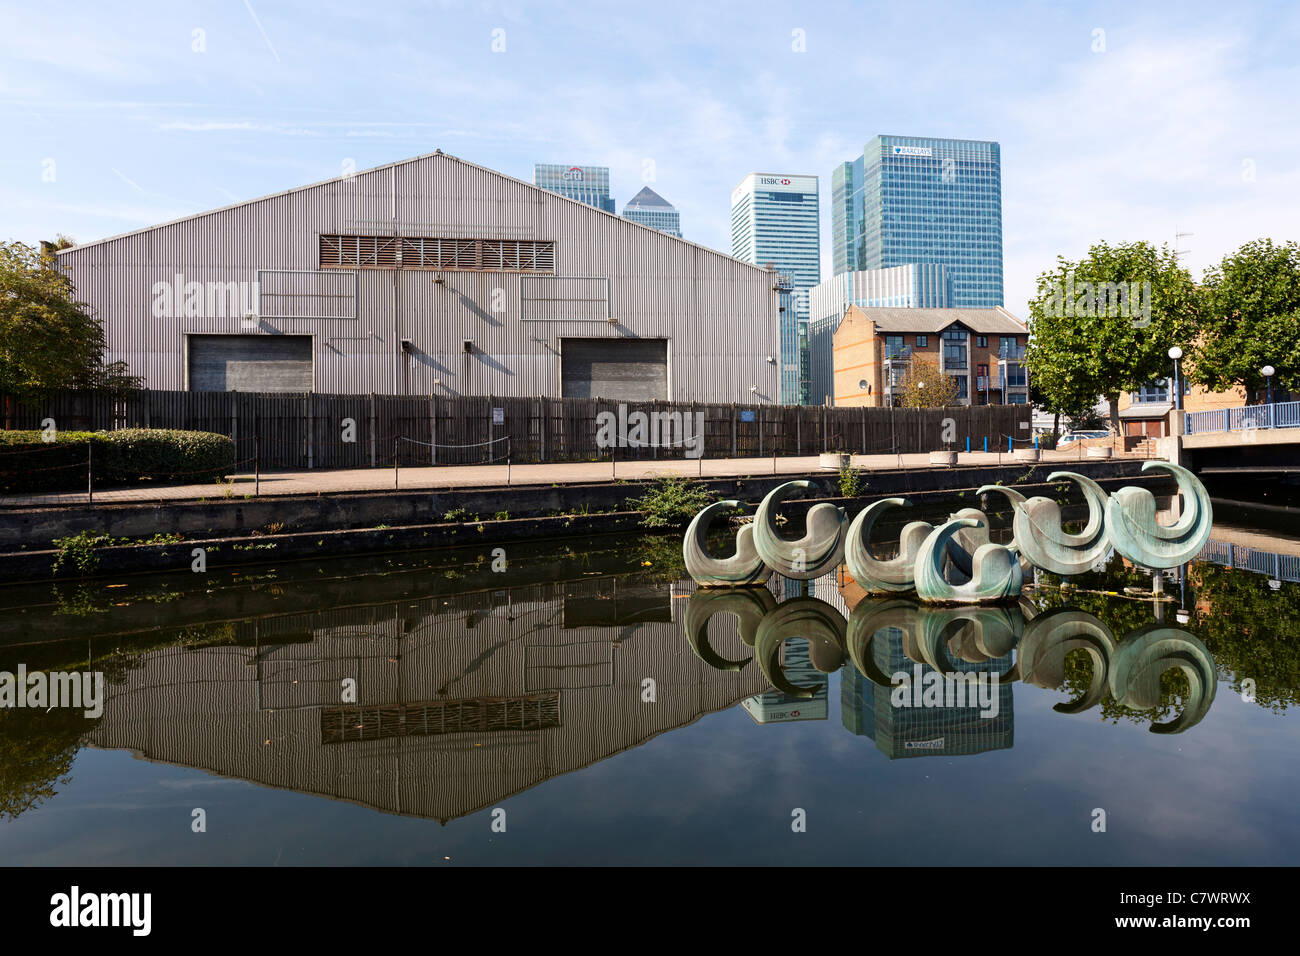 The Leap by Franta Belsky depicts eight dolphins, Blackwall Basin, Manchester Road, Isle of Dogs, London, England, UK. Stock Photo